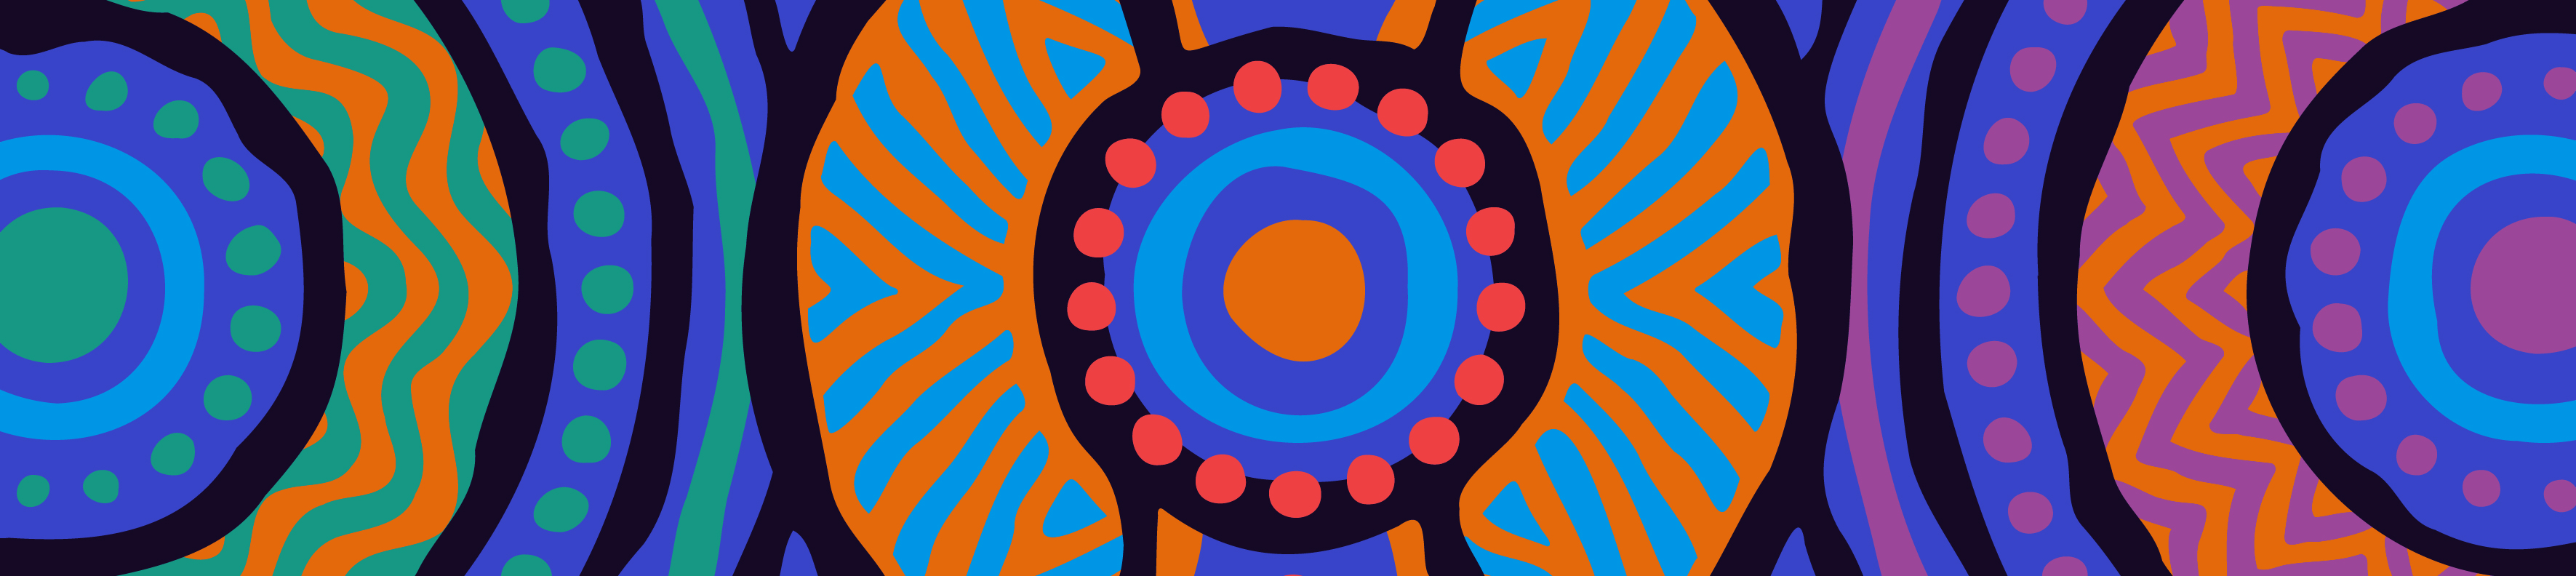 Blue green orange pink circles of Indigenous artwork. There is no text.